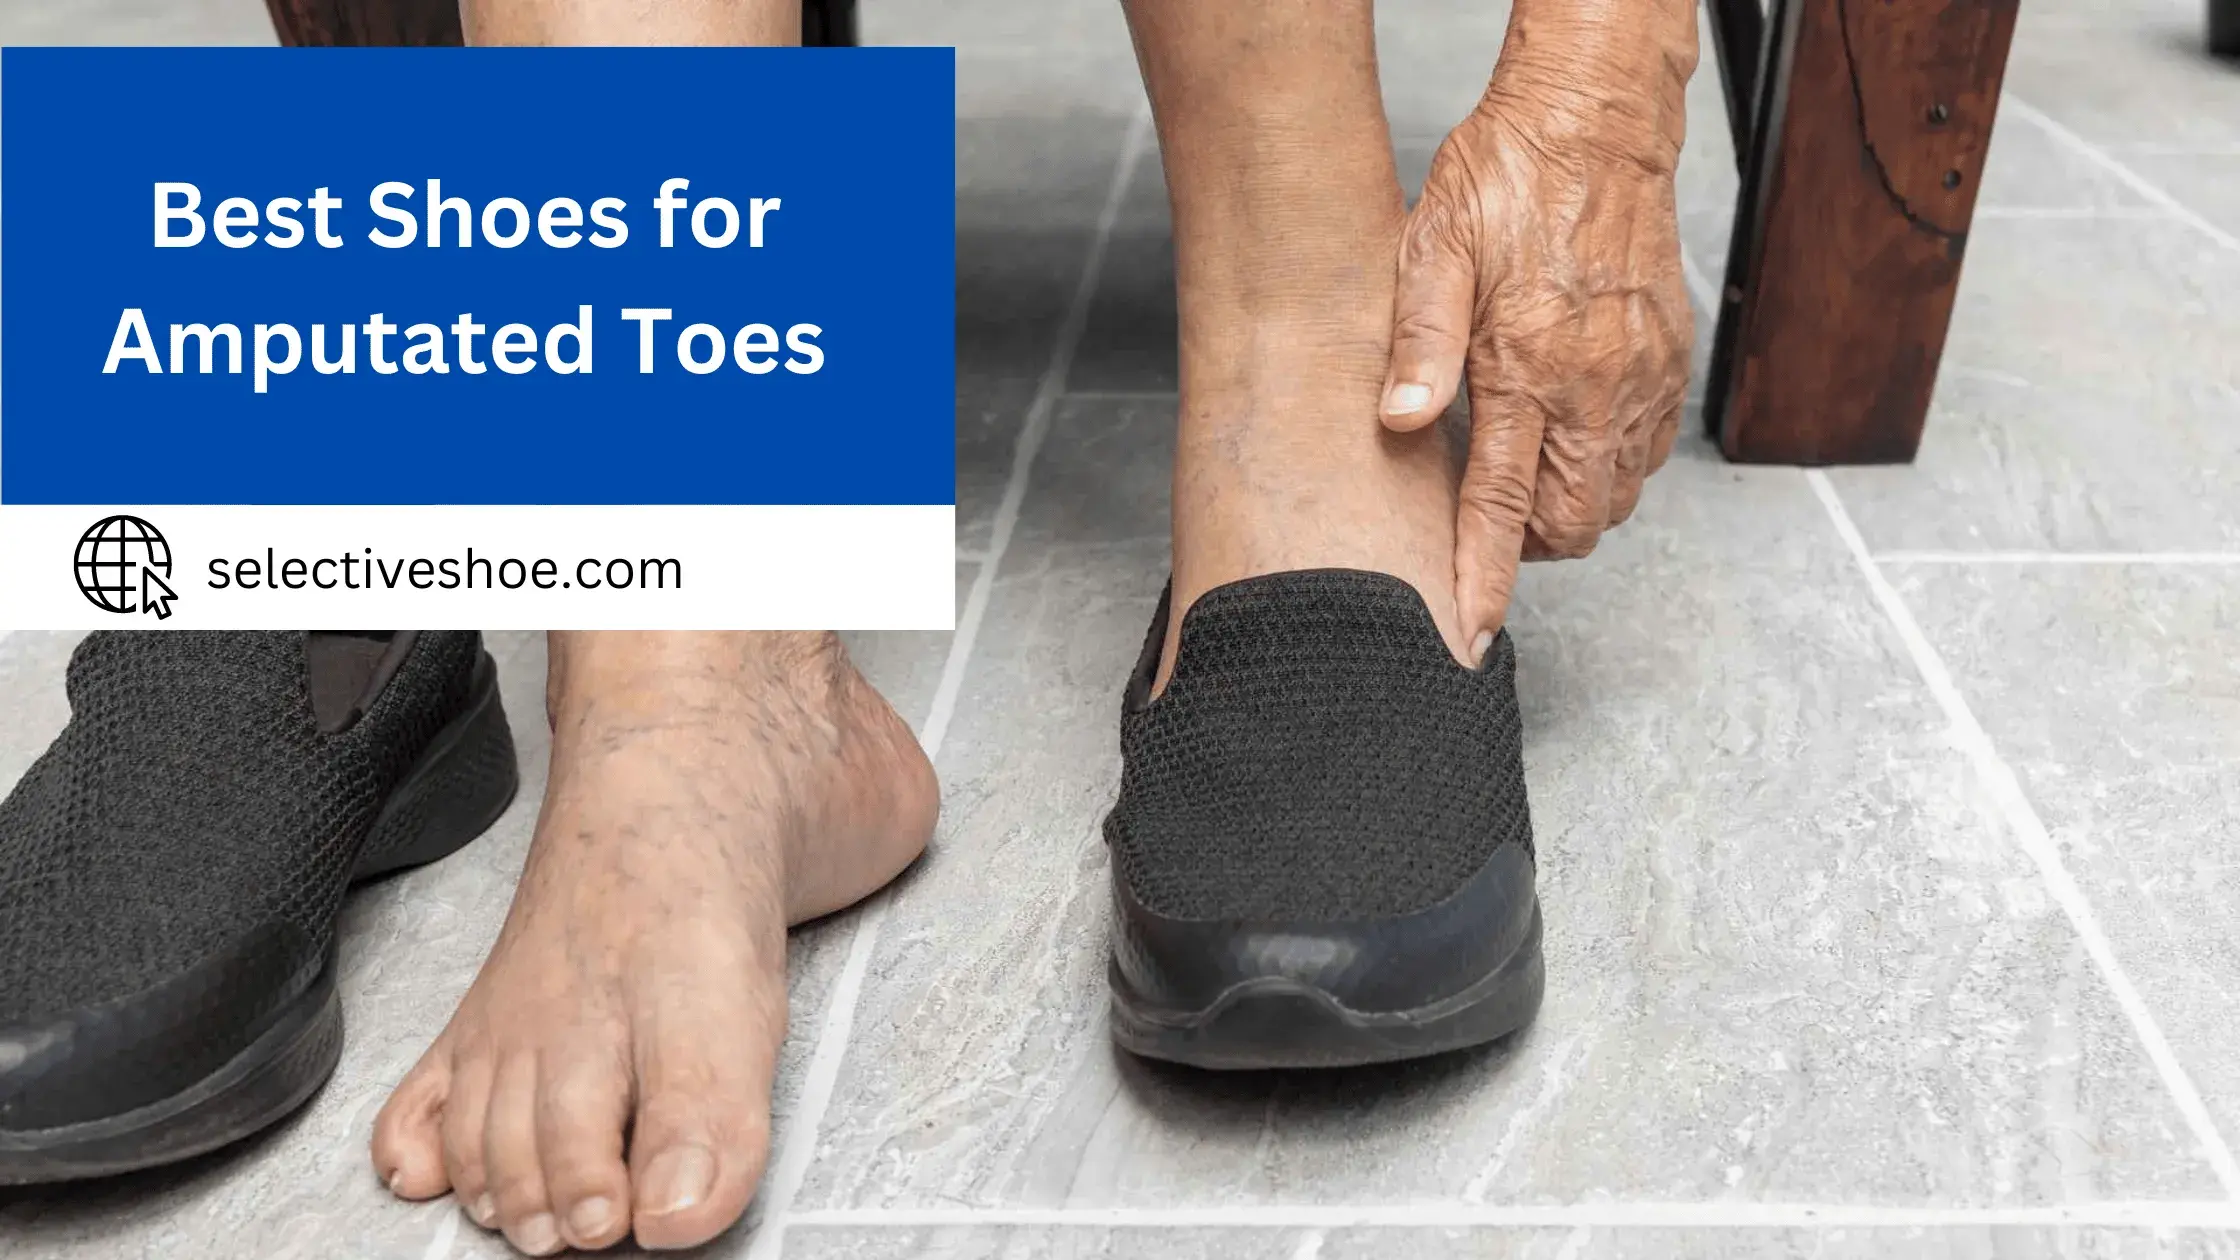 Best Shoes For Amputated Toes - A Comprehensive Guide